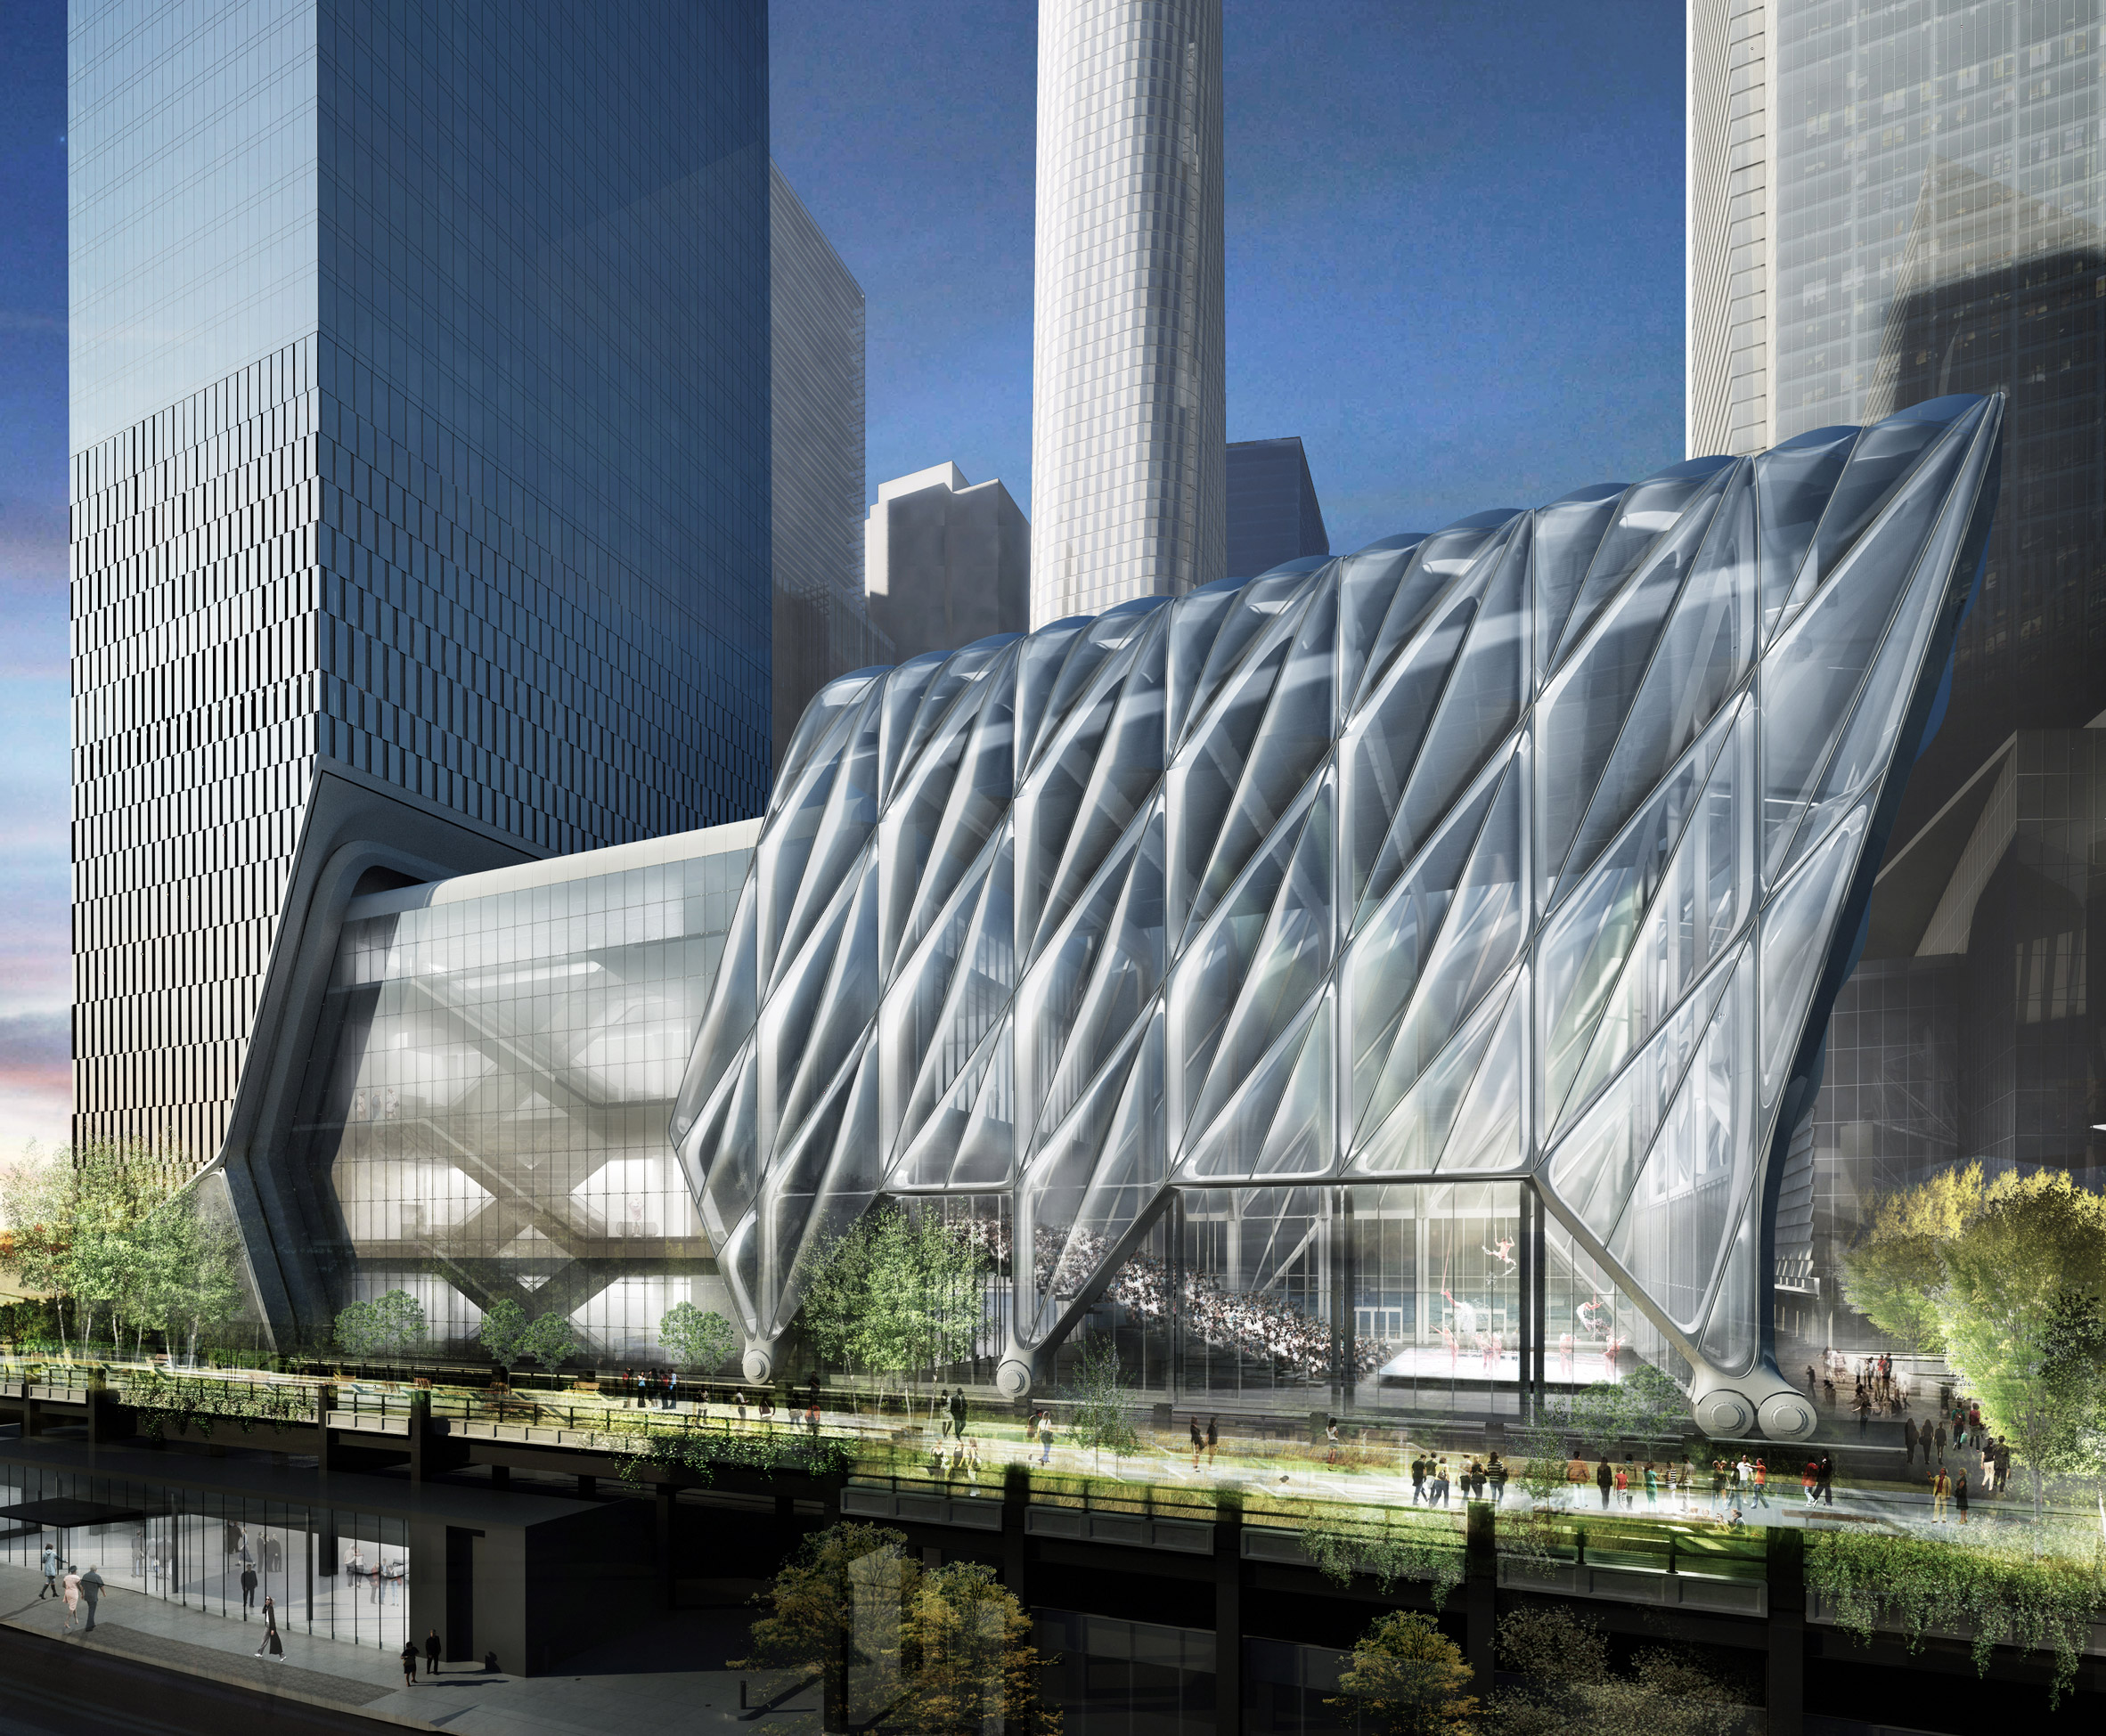 The Shed by Diller Scofidio + Renfro